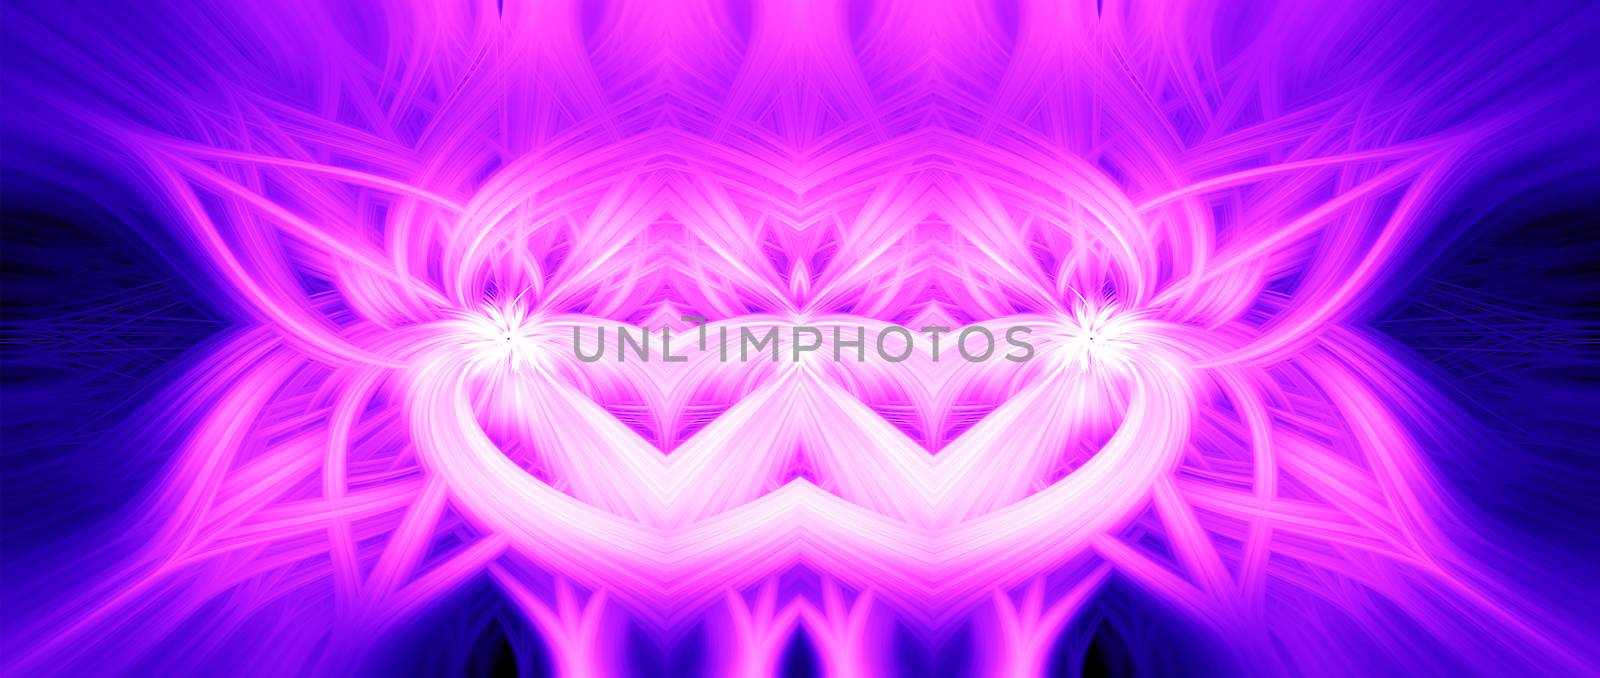 Beautiful abstract intertwined 3d fibers forming a shape of sparkle, flame, flower, interlinked hearts. Pink, blue, and purple colors. Illustration. Banner and panorama size